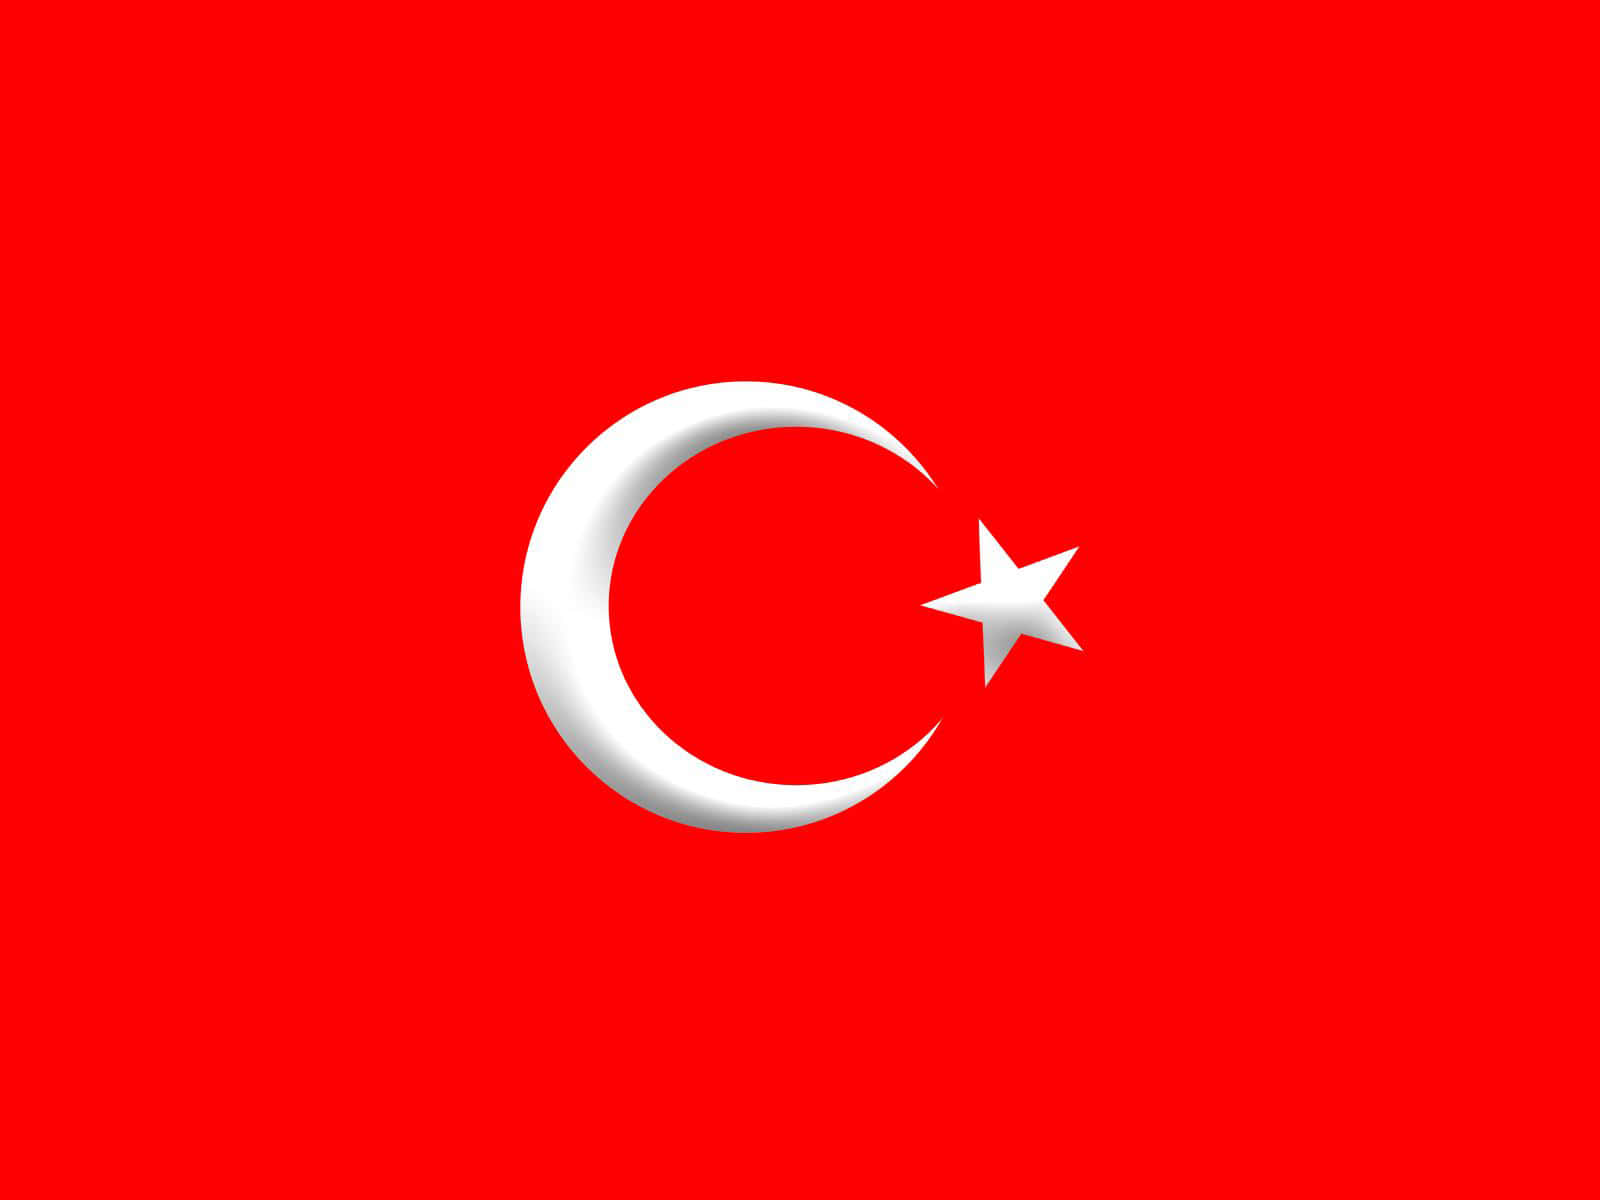 The Flag Of Turkey On A Red Background